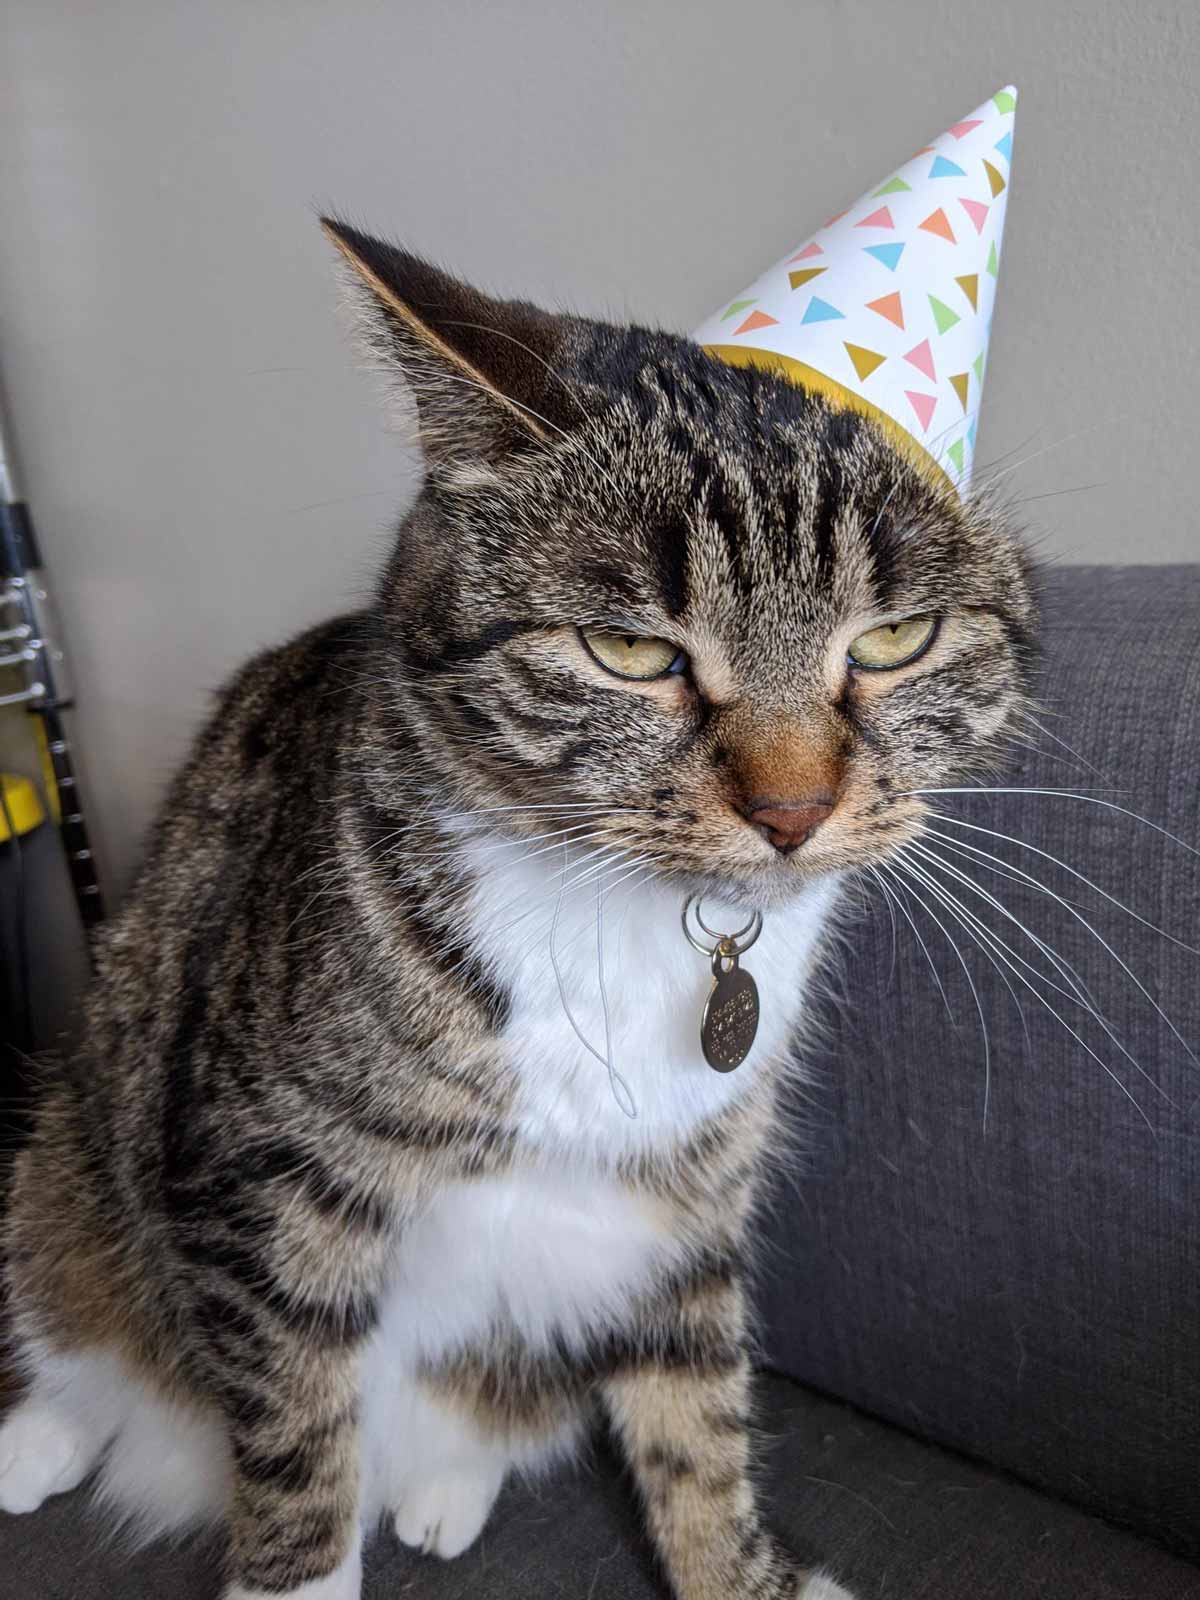 Funny picture of a cat wearing a birthday hat and looking annoyed by it